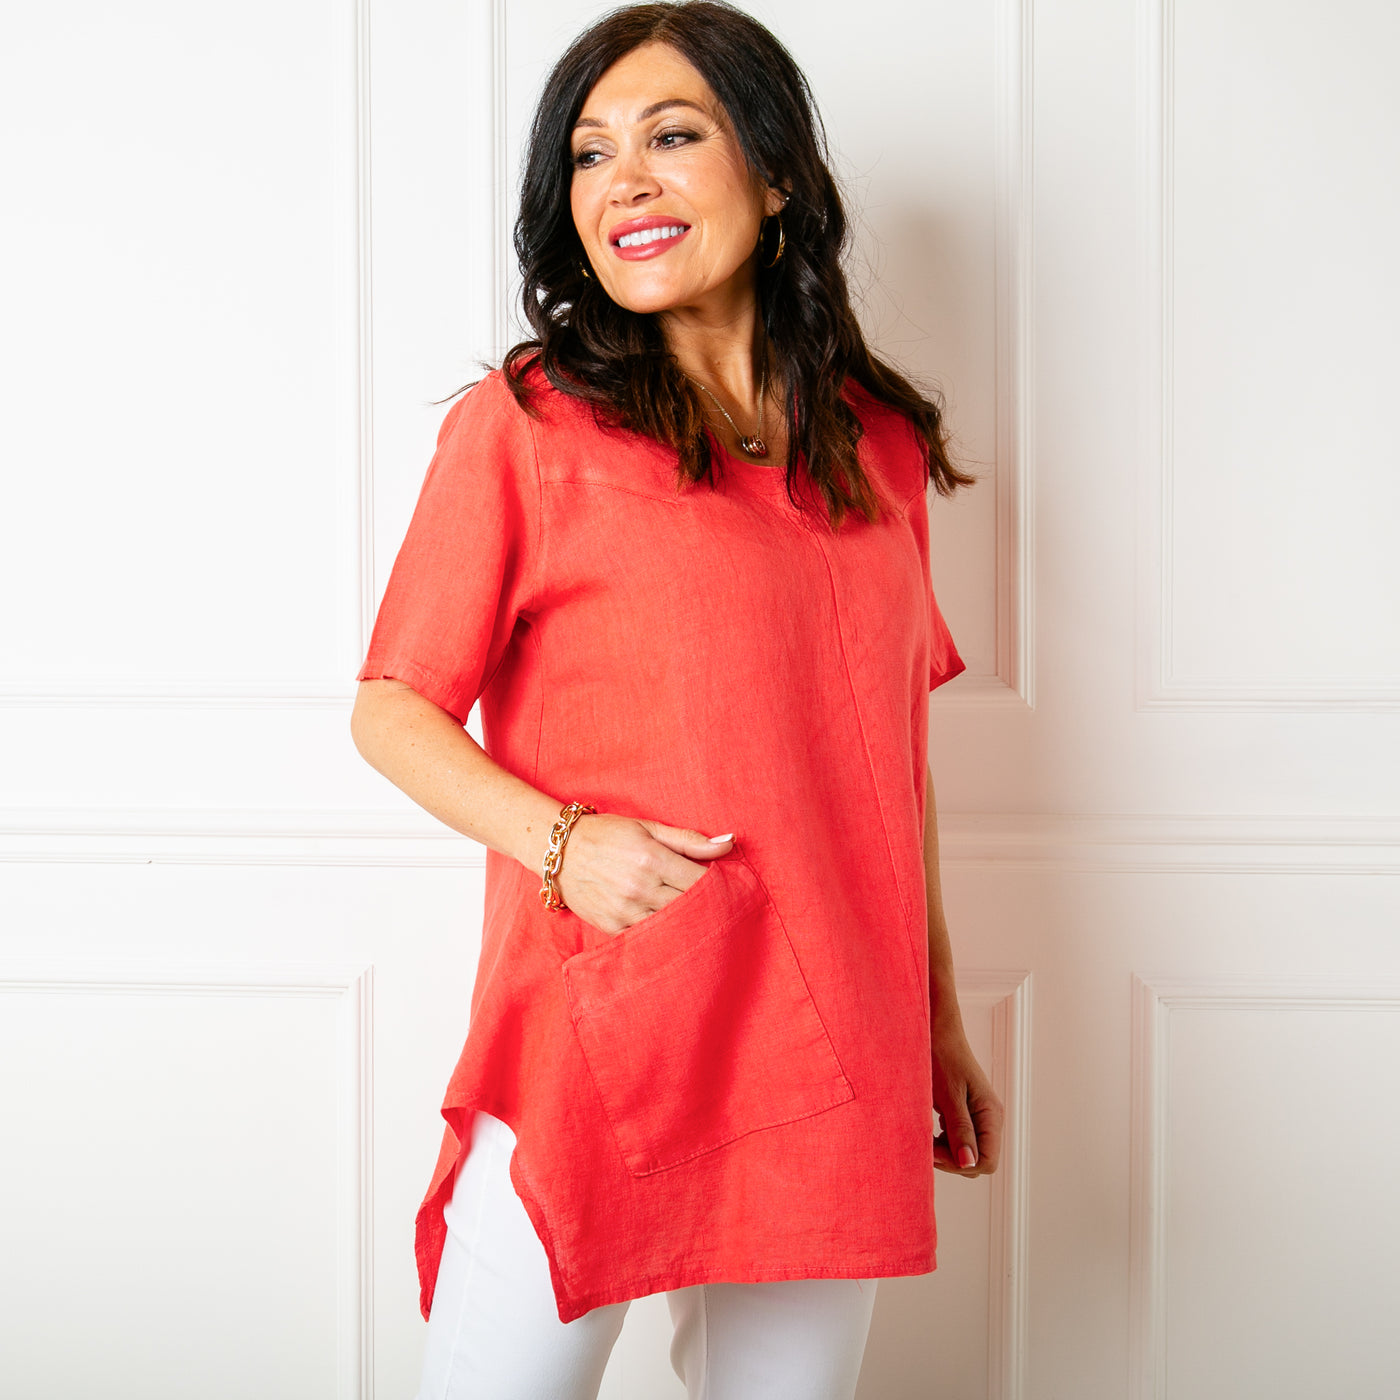 The coral orange red Two Pocket Linen Top with a statement flared hemline